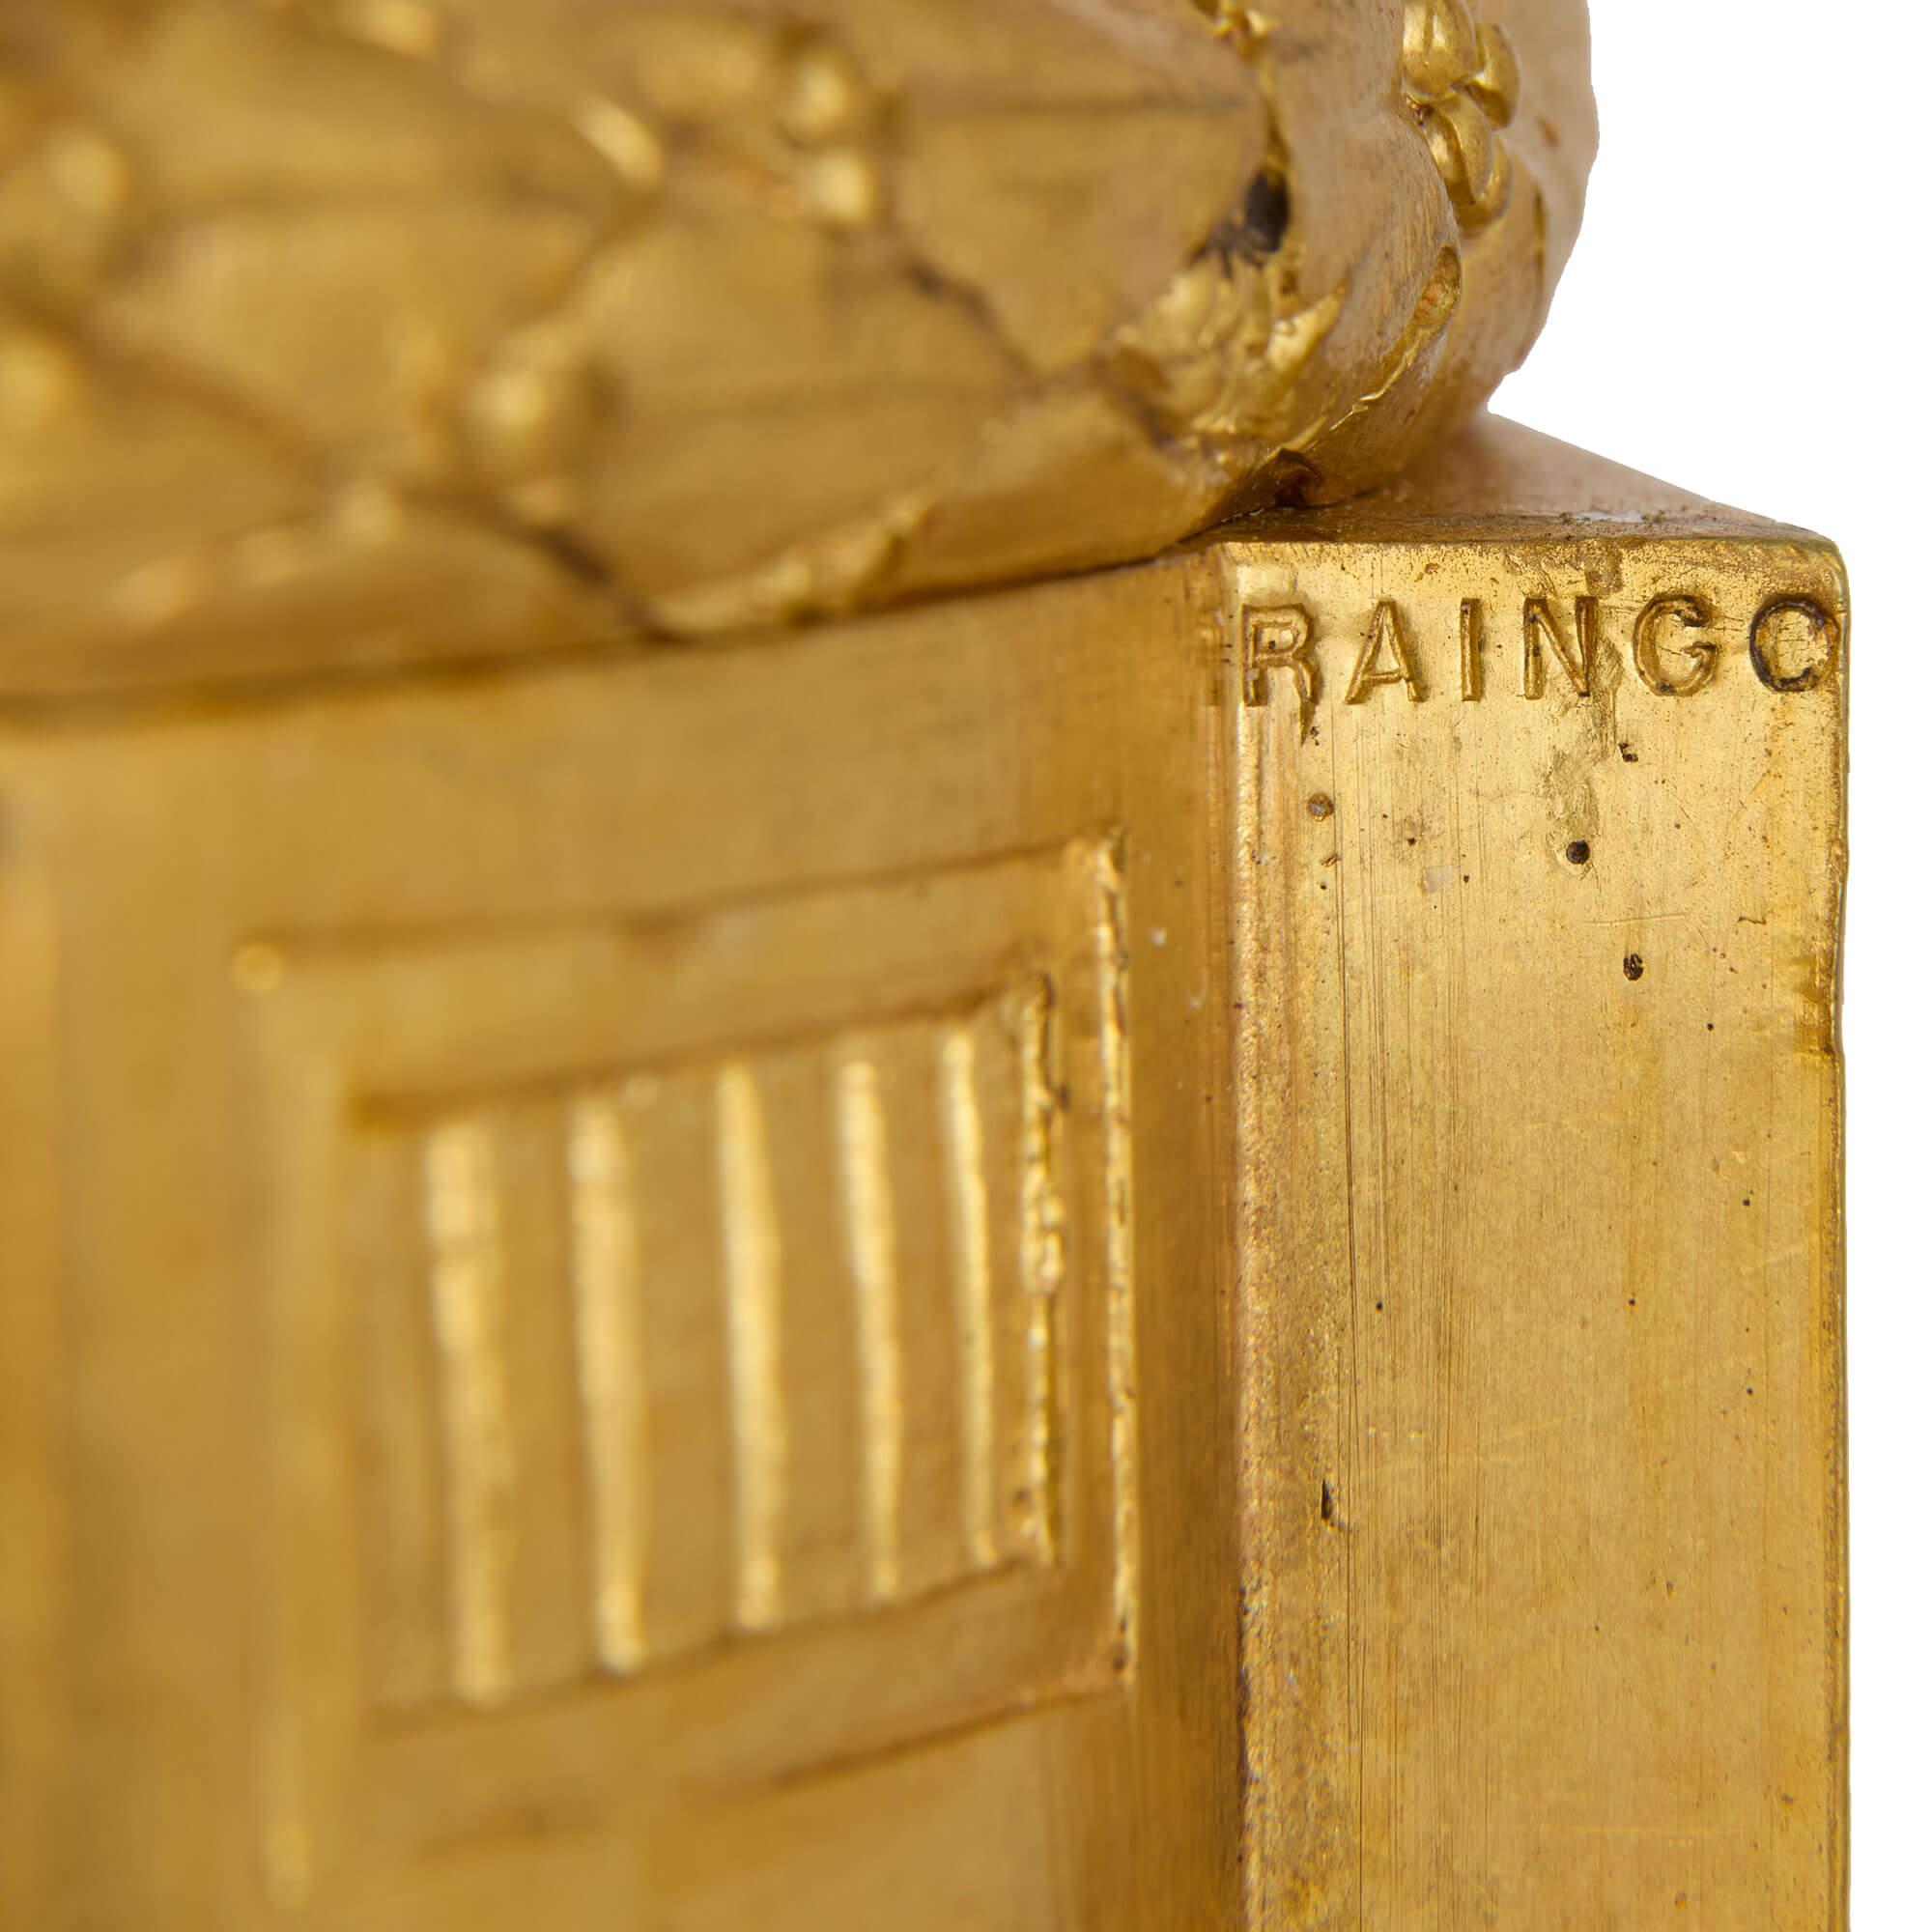 19th Century Pair of Empire-Style Marble and Ormolu Vases by Raingo  For Sale